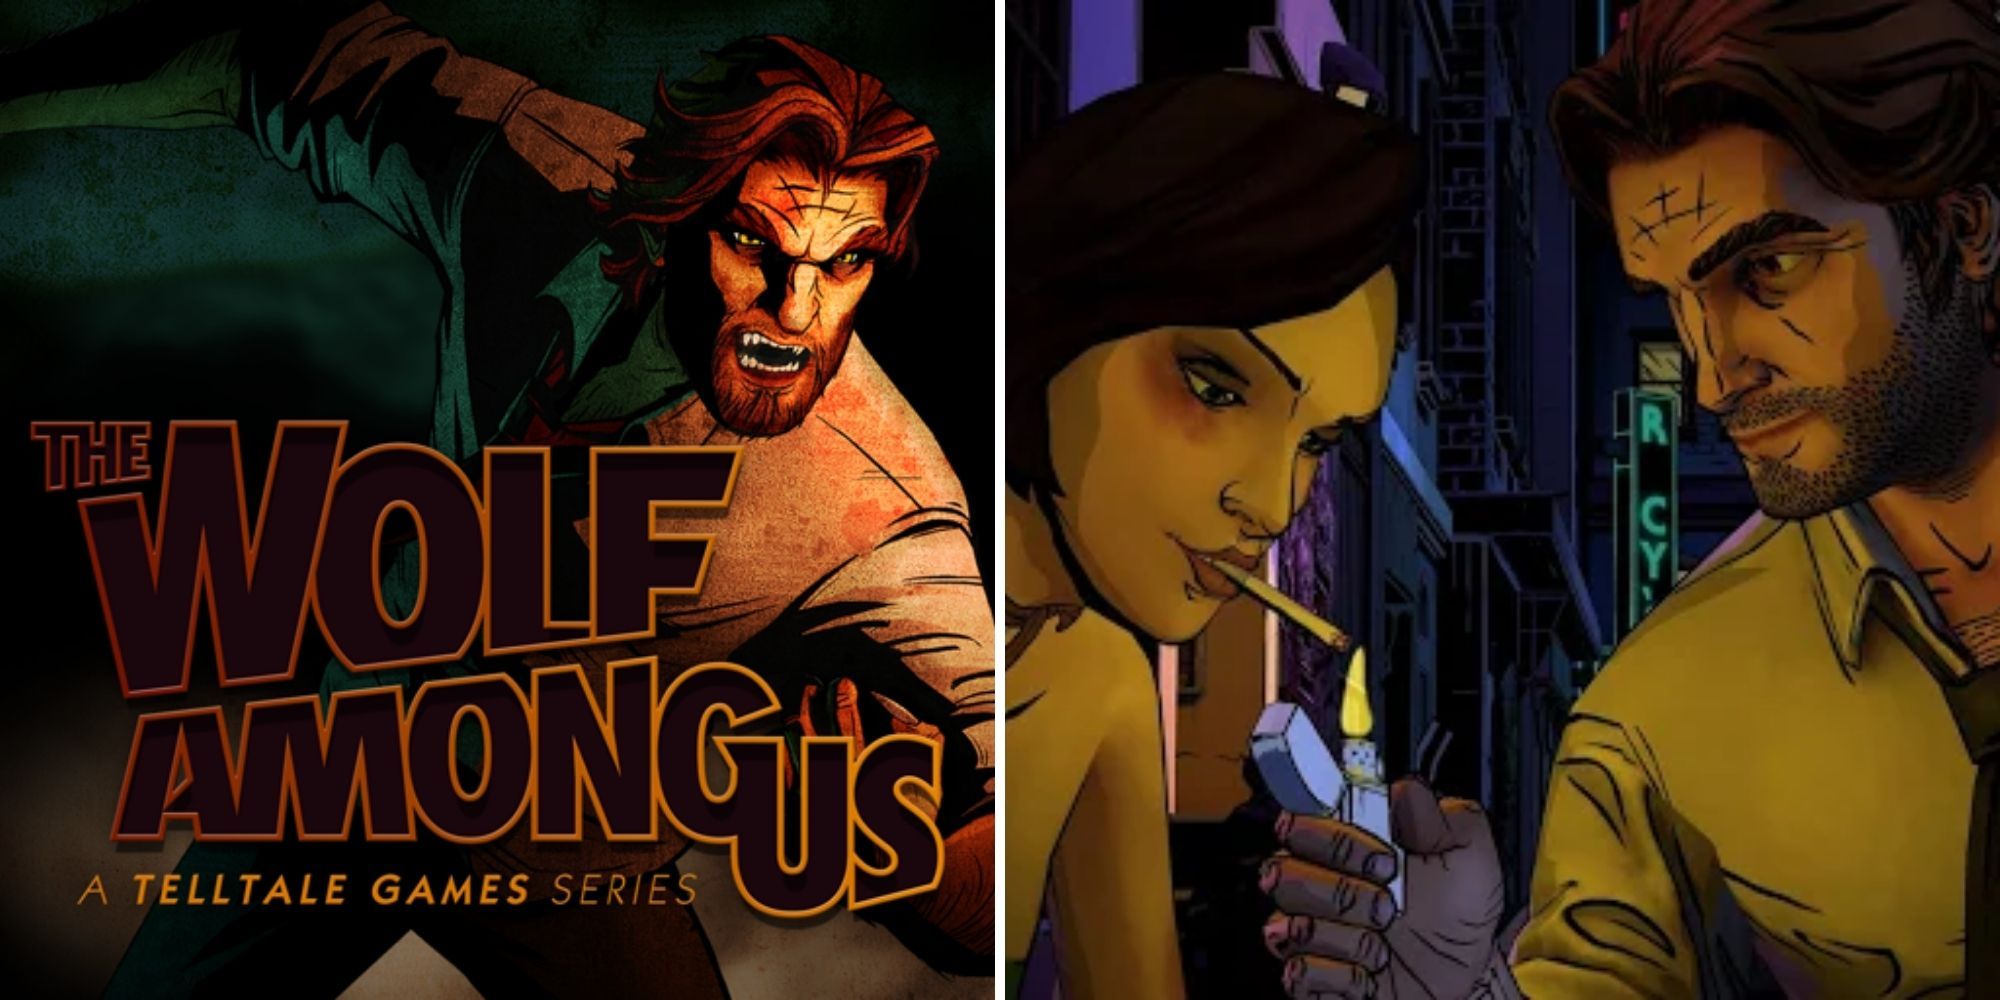 The Wolf Among Us Mobile Image of Bigby transforming and Bigby smoking a cigarette with Crane